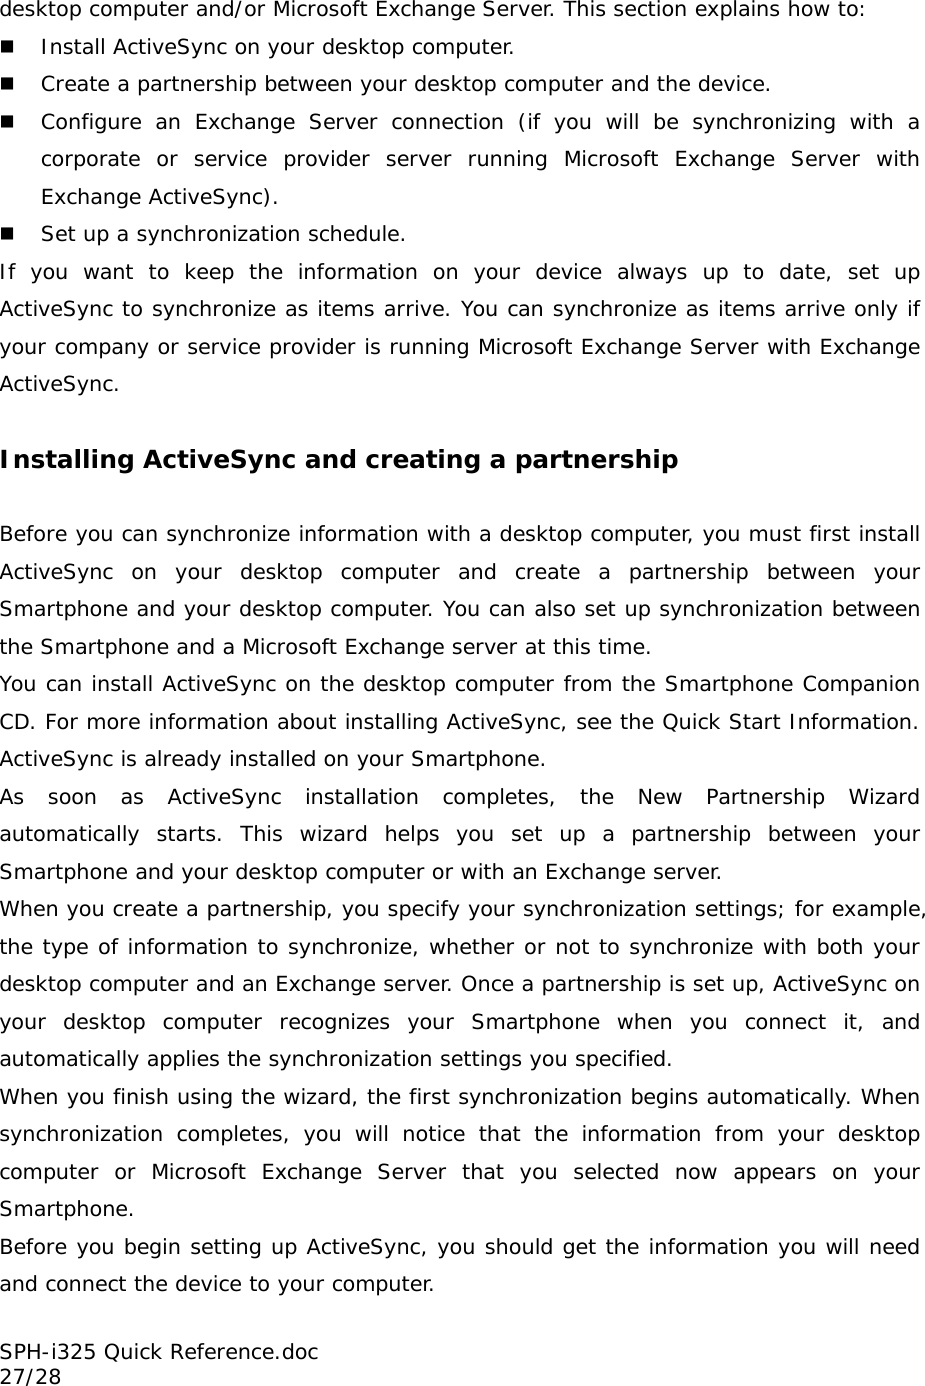 desktop computer and/or Microsoft Exchange Server. This section explains how to:   Install ActiveSync on your desktop computer.  Create a partnership between your desktop computer and the device.  Configure an Exchange Server connection (if you will be synchronizing with a corporate or service provider server running Microsoft Exchange Server with Exchange ActiveSync).  Set up a synchronization schedule. If you want to keep the information on your device always up to date, set up ActiveSync to synchronize as items arrive. You can synchronize as items arrive only if your company or service provider is running Microsoft Exchange Server with Exchange ActiveSync.  Installing ActiveSync and creating a partnership  Before you can synchronize information with a desktop computer, you must first install ActiveSync on your desktop computer and create a partnership between your Smartphone and your desktop computer. You can also set up synchronization between the Smartphone and a Microsoft Exchange server at this time.  You can install ActiveSync on the desktop computer from the Smartphone Companion CD. For more information about installing ActiveSync, see the Quick Start Information. ActiveSync is already installed on your Smartphone. As soon as ActiveSync installation completes, the New Partnership Wizard automatically starts. This wizard helps you set up a partnership between your Smartphone and your desktop computer or with an Exchange server.  When you create a partnership, you specify your synchronization settings; for example, the type of information to synchronize, whether or not to synchronize with both your desktop computer and an Exchange server. Once a partnership is set up, ActiveSync on your desktop computer recognizes your Smartphone when you connect it, and automatically applies the synchronization settings you specified. When you finish using the wizard, the first synchronization begins automatically. When synchronization completes, you will notice that the information from your desktop computer or Microsoft Exchange Server that you selected now appears on your Smartphone. Before you begin setting up ActiveSync, you should get the information you will need and connect the device to your computer. SPH-i325 Quick Reference.doc                                                          27/28 